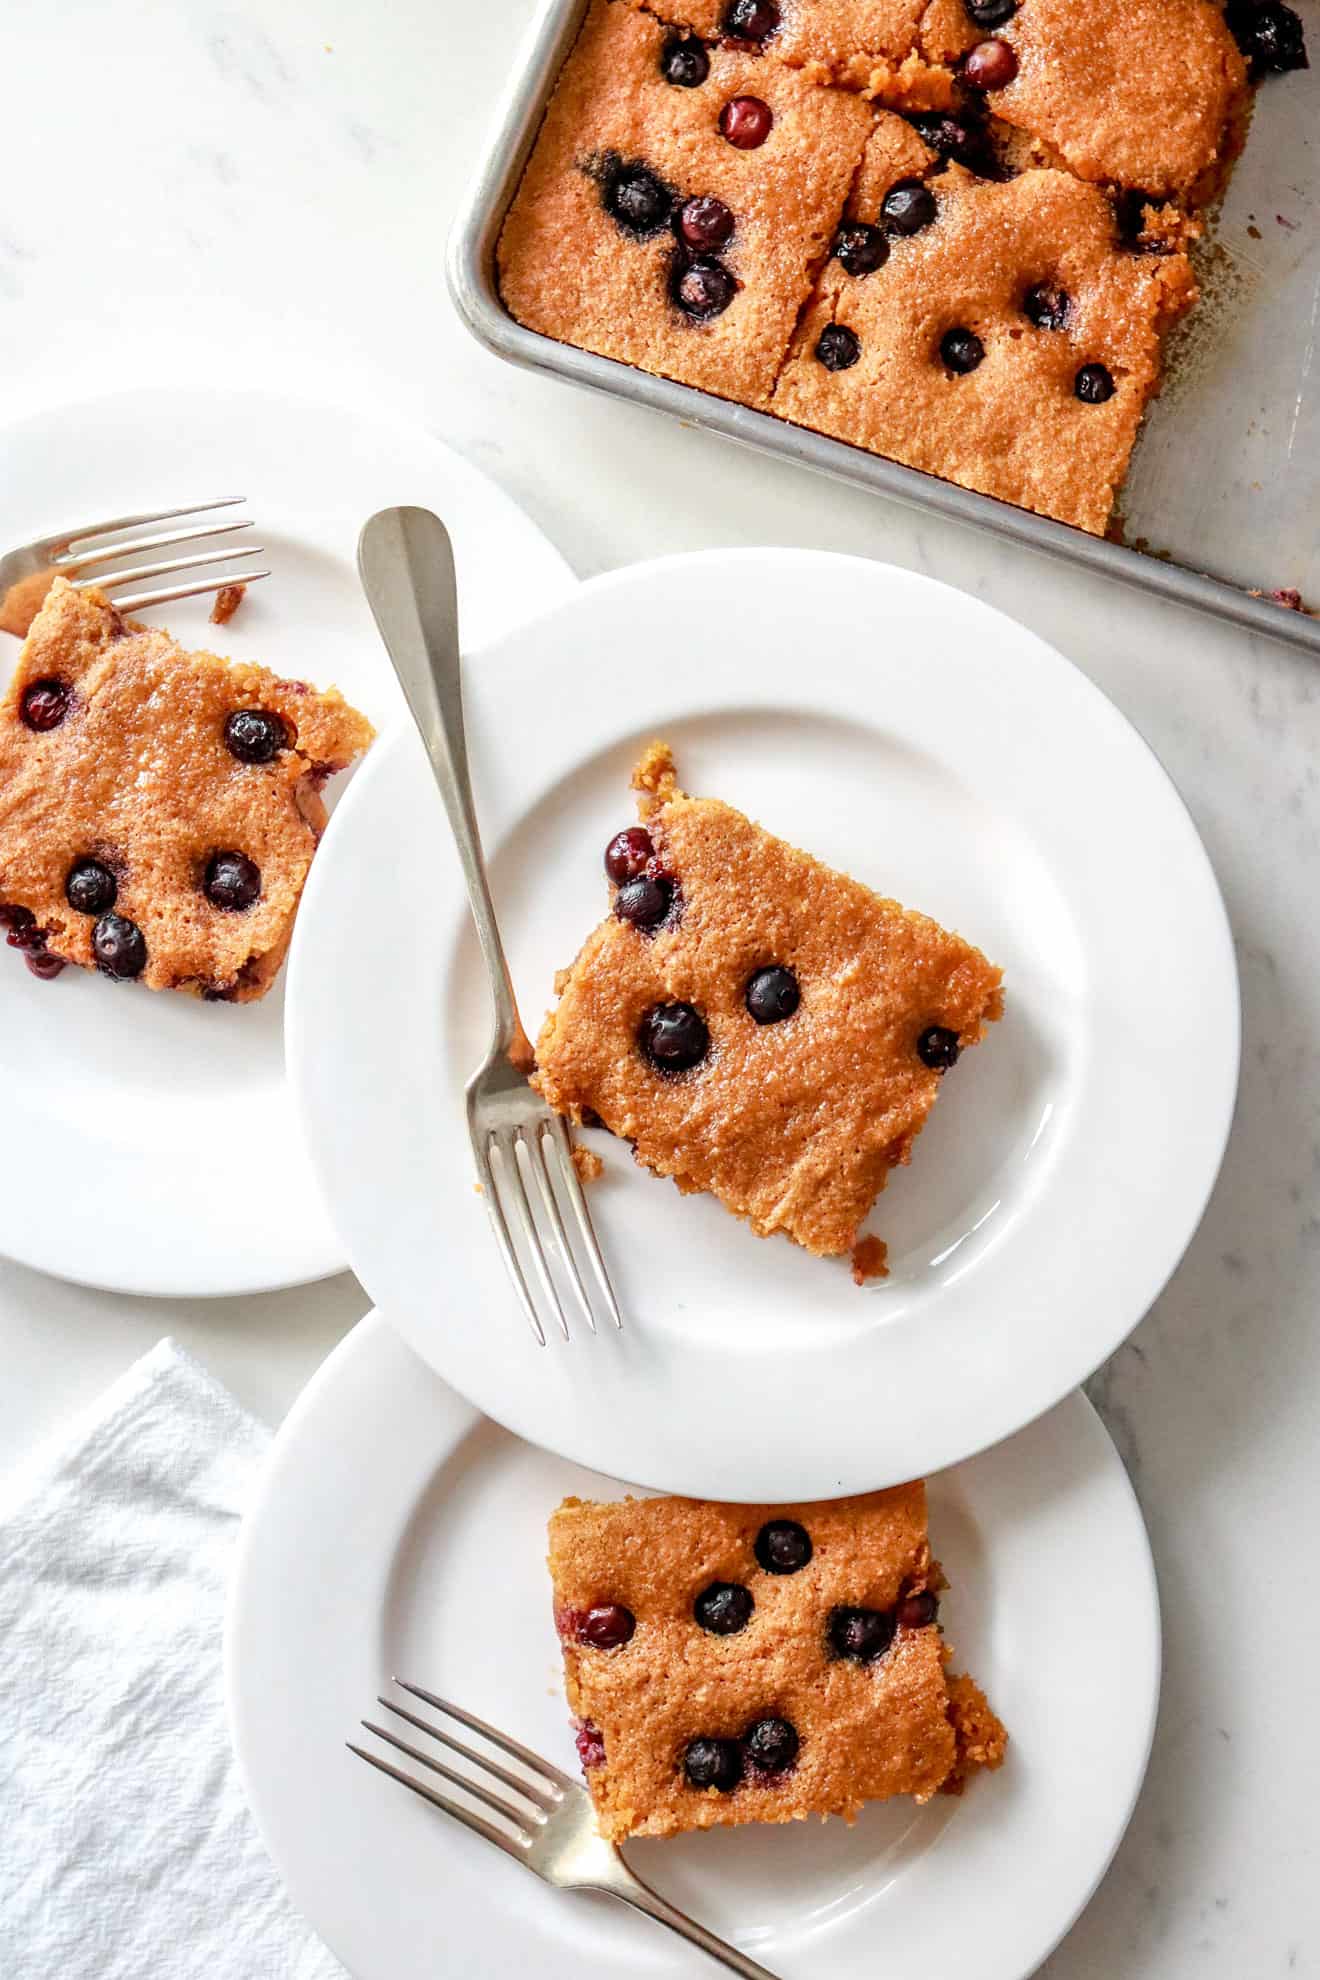 This is an overhead vertical image of three white plates with squares of blueberry cake on them. Each has a silver fork leaning against the plate. To the top right corner is a half sheet pan with more blueberry squares. The sheet pan and plates sit on a white marble surface. 